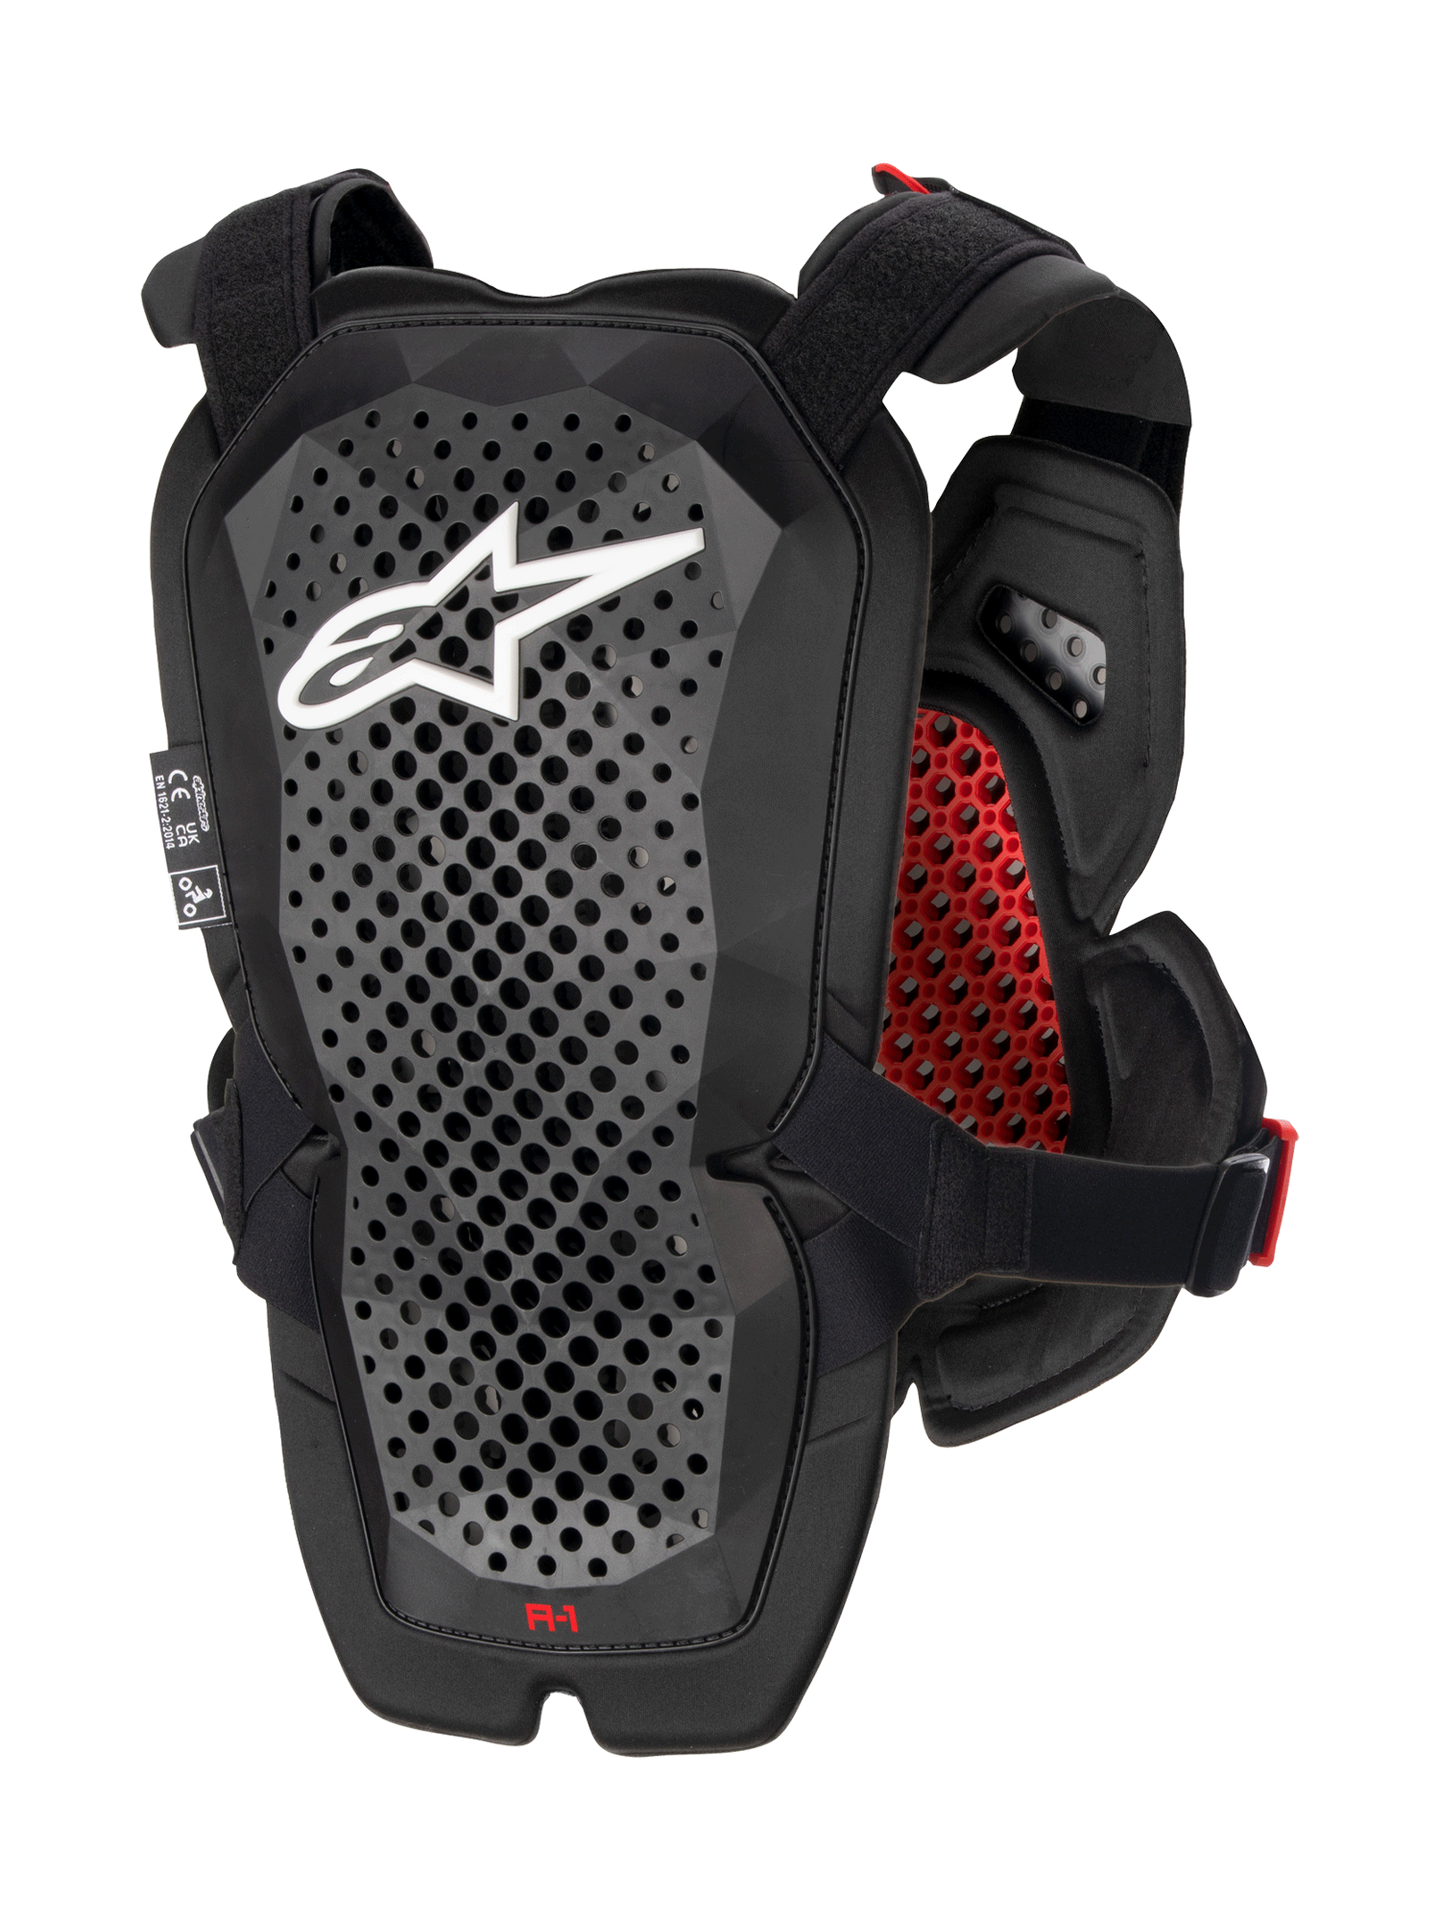 A-1 Pro Chest Protector